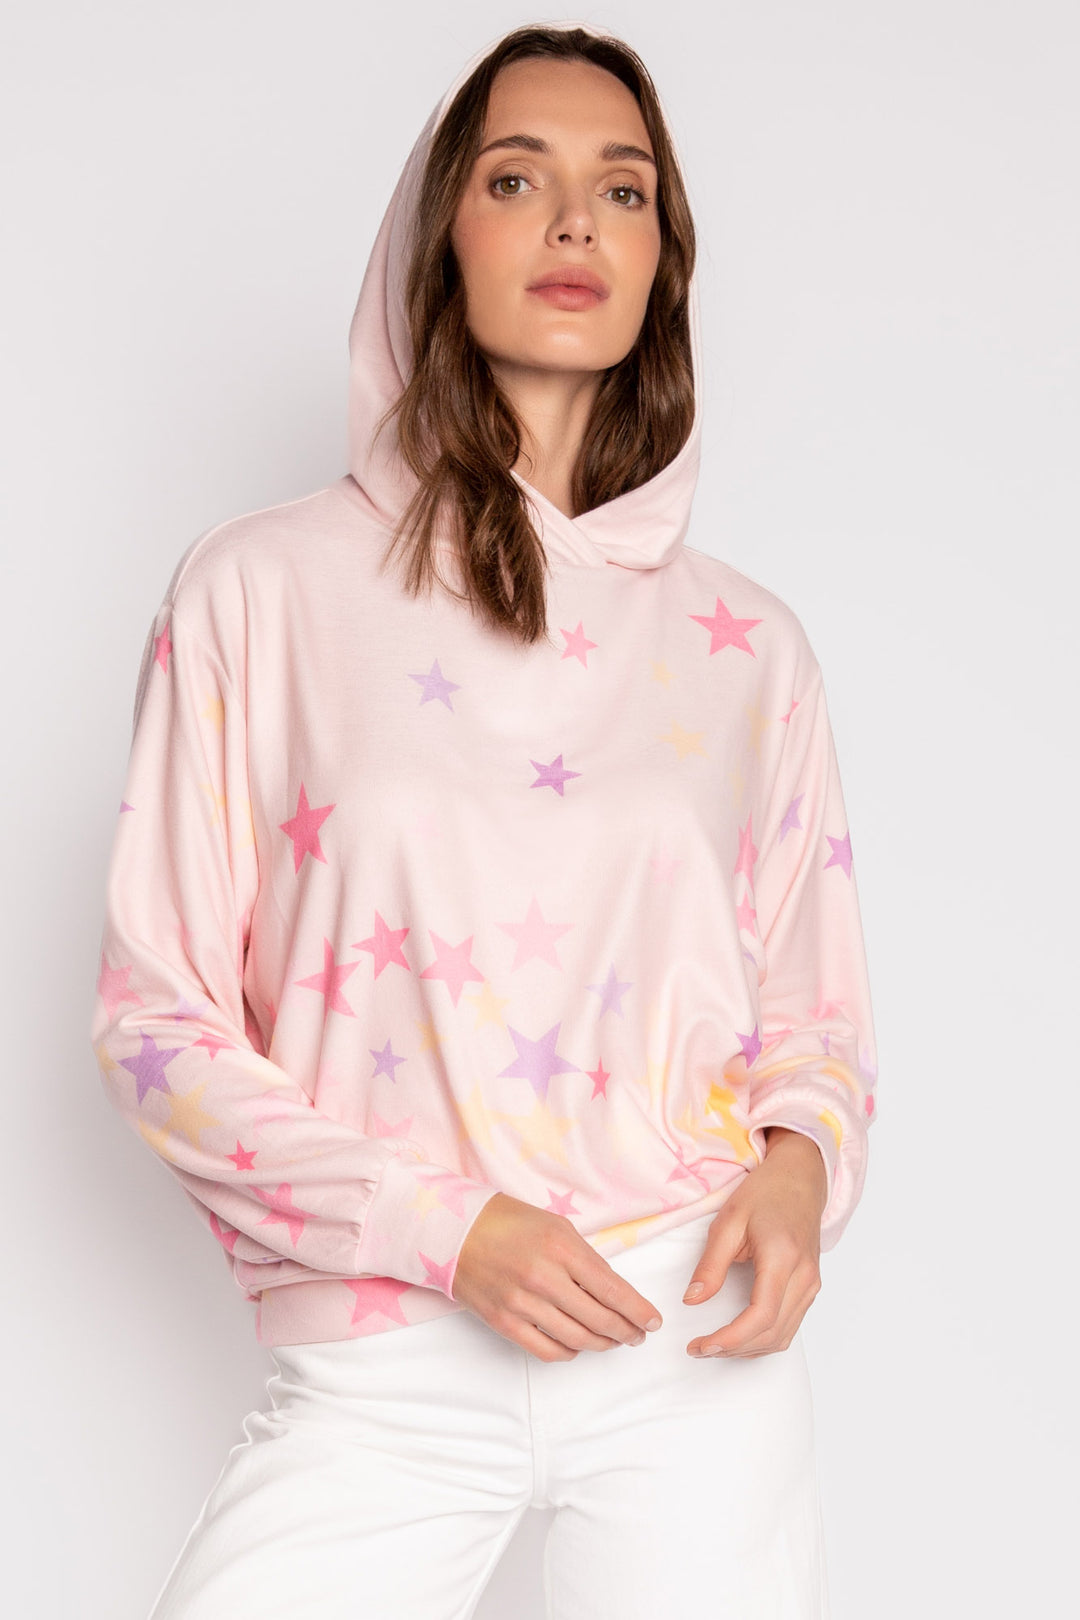 Blush pink hoody with colorful star print on peachy jersey fabric. (7125197979748)